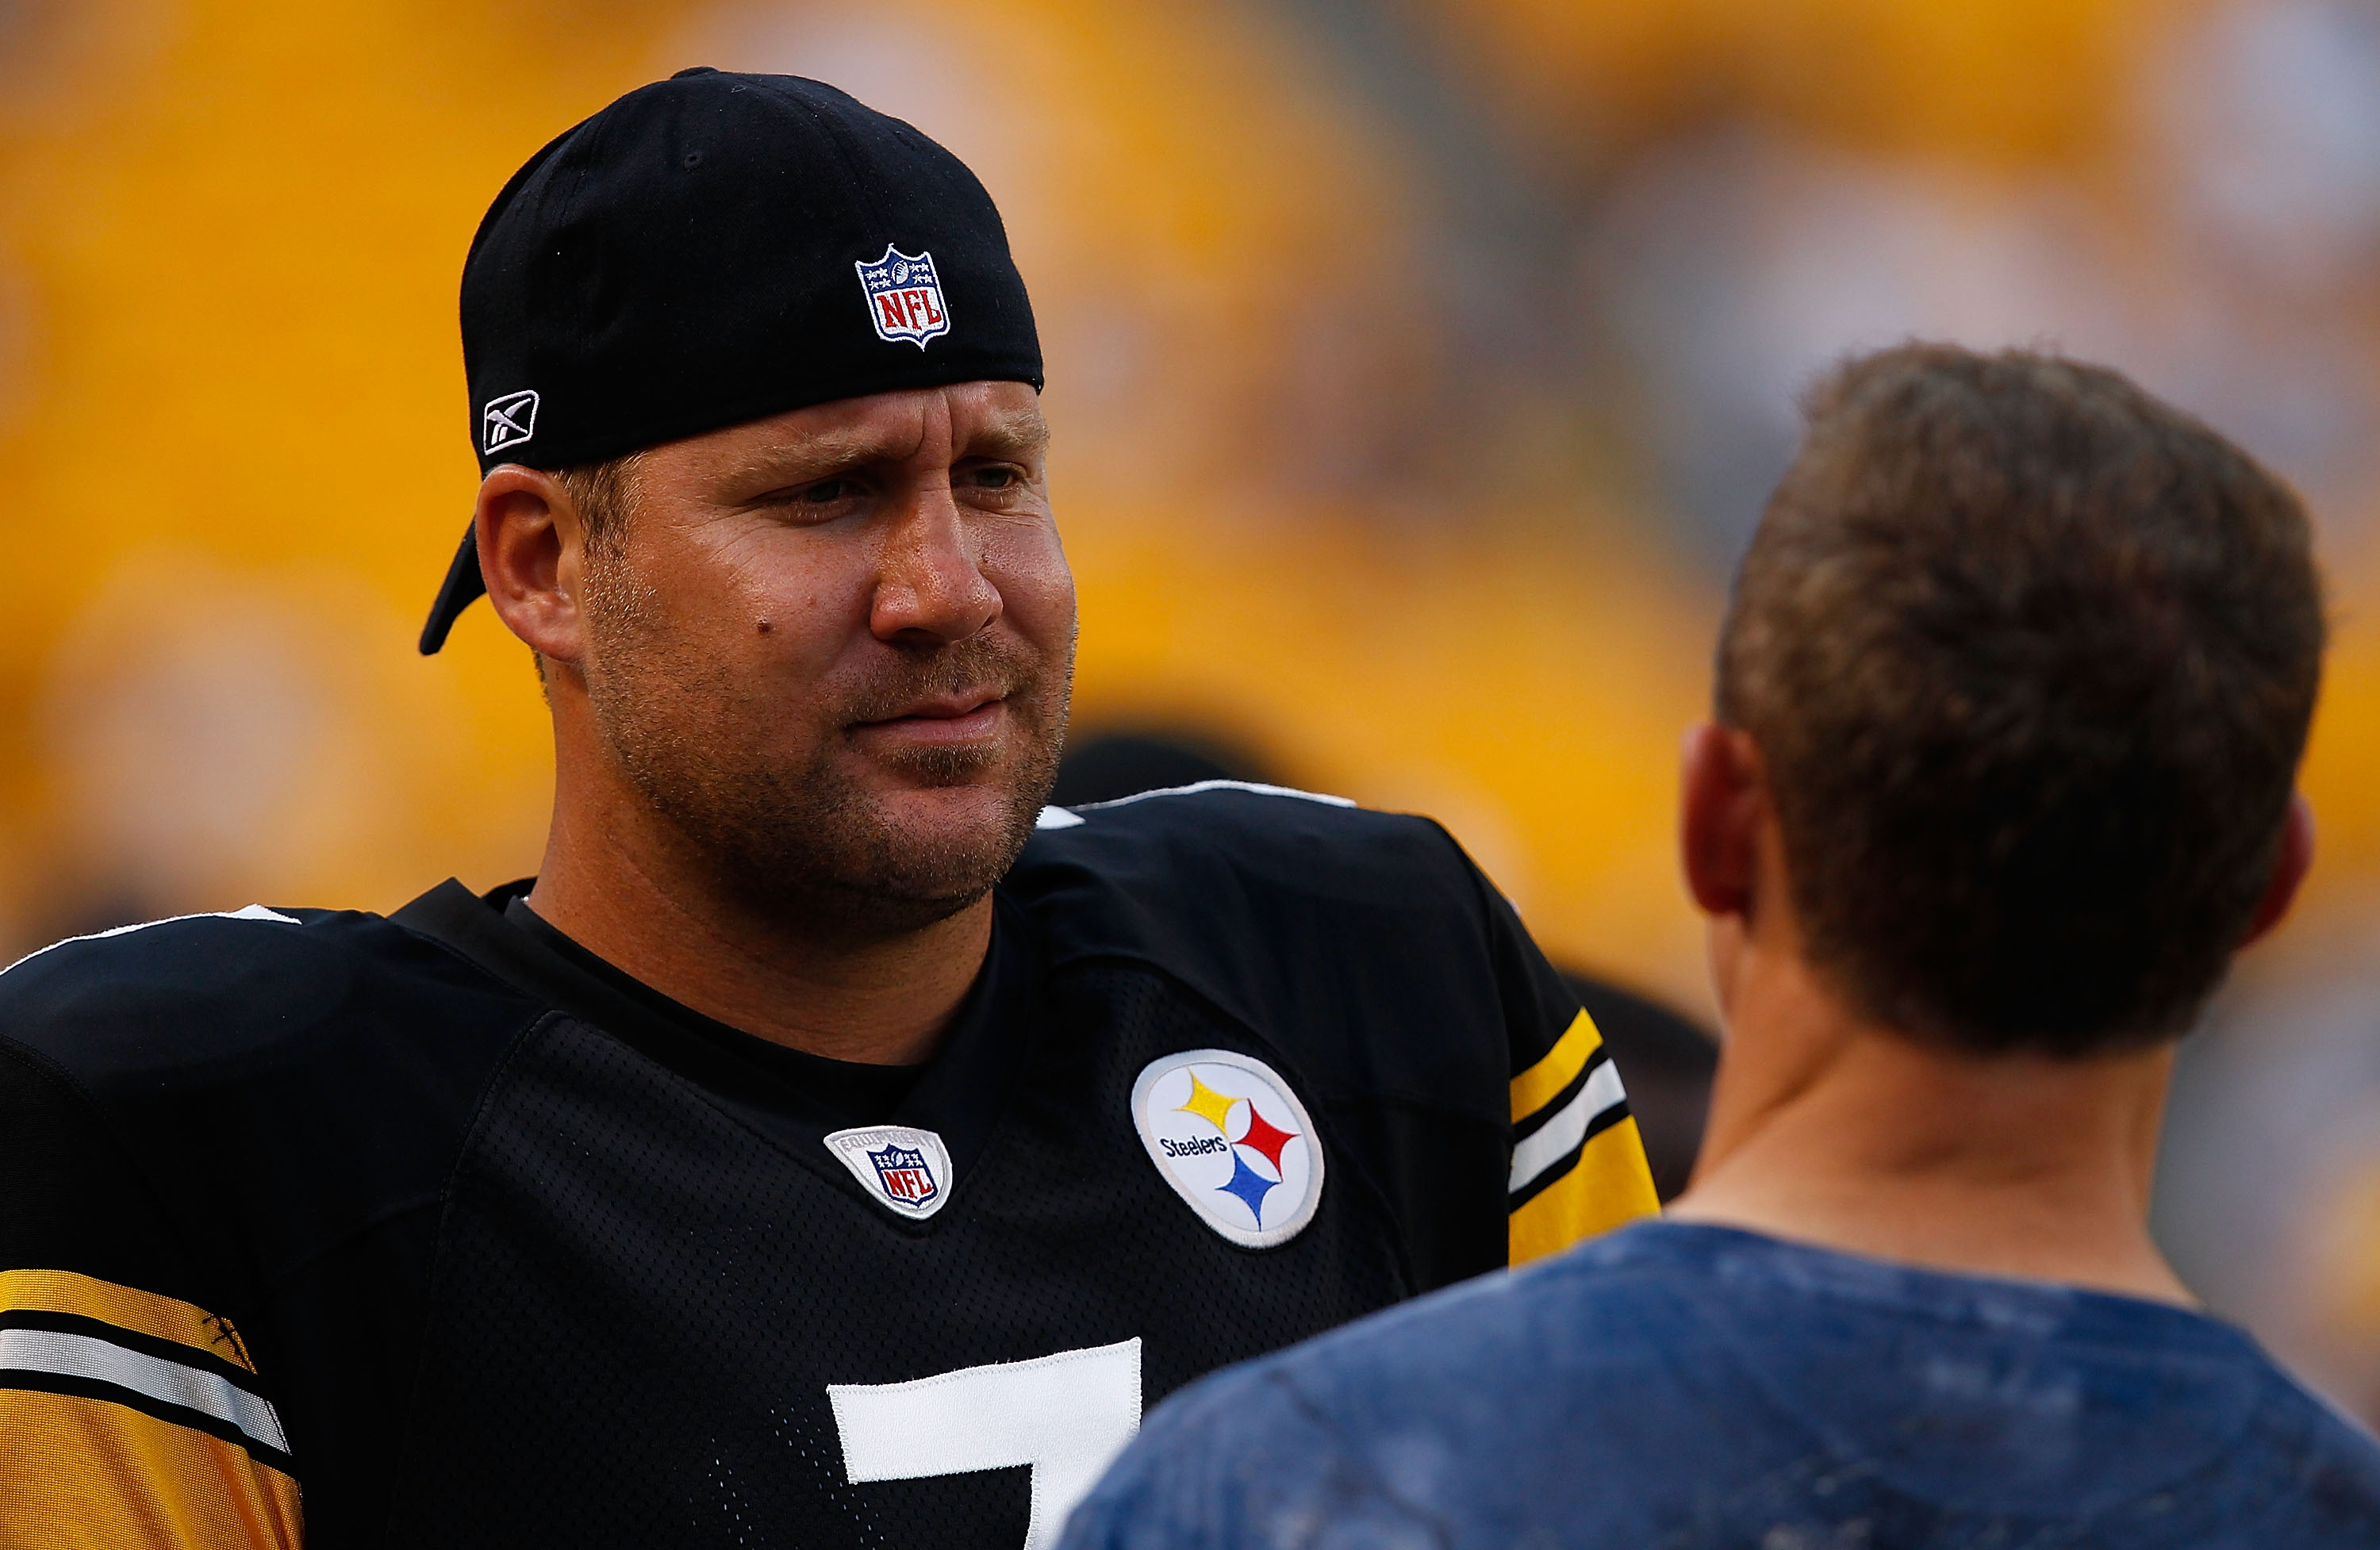 PITTSBURGH - AUGUST 14:  Ben Roethlisberger #7 of the Pittsburgh Steelers jokes around prior to the game with former Steeler Merril Hoge against the Detroit Lions on August 14, 2010 at Heinz Field in Pittsburgh, Pennsylvania. Steelers won 23-7.  (Photo by